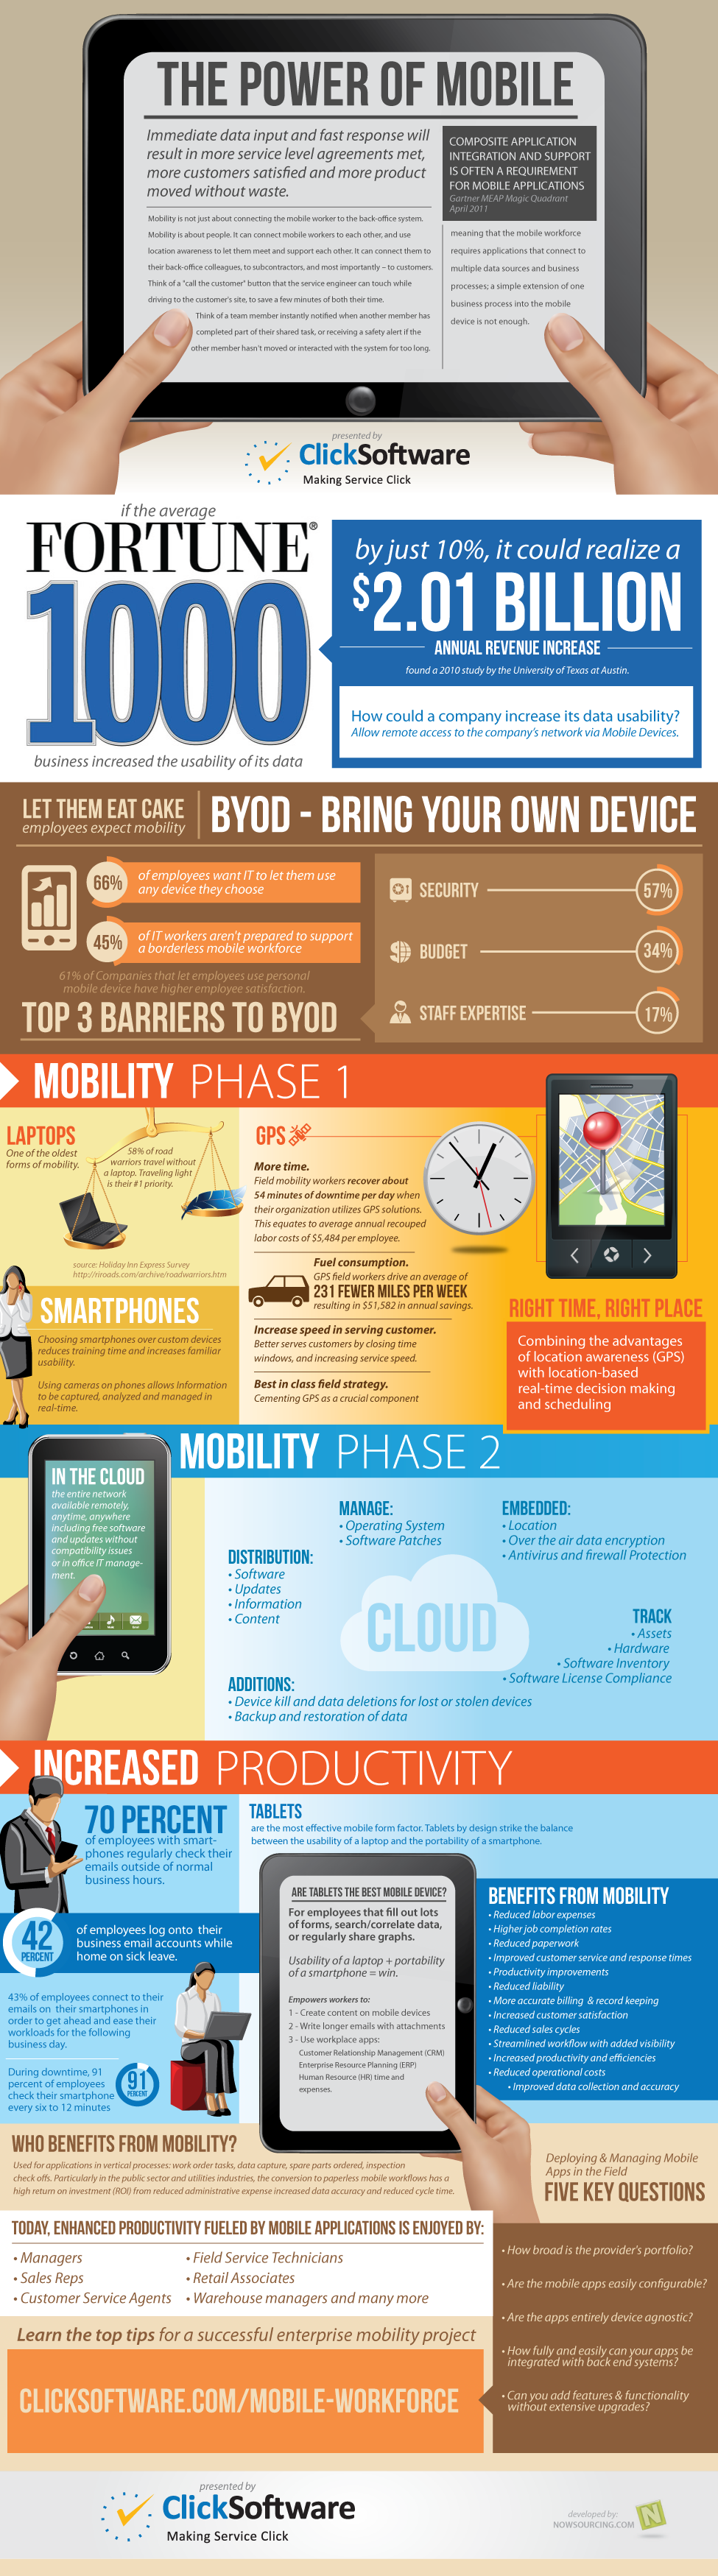 Mobile-infographic